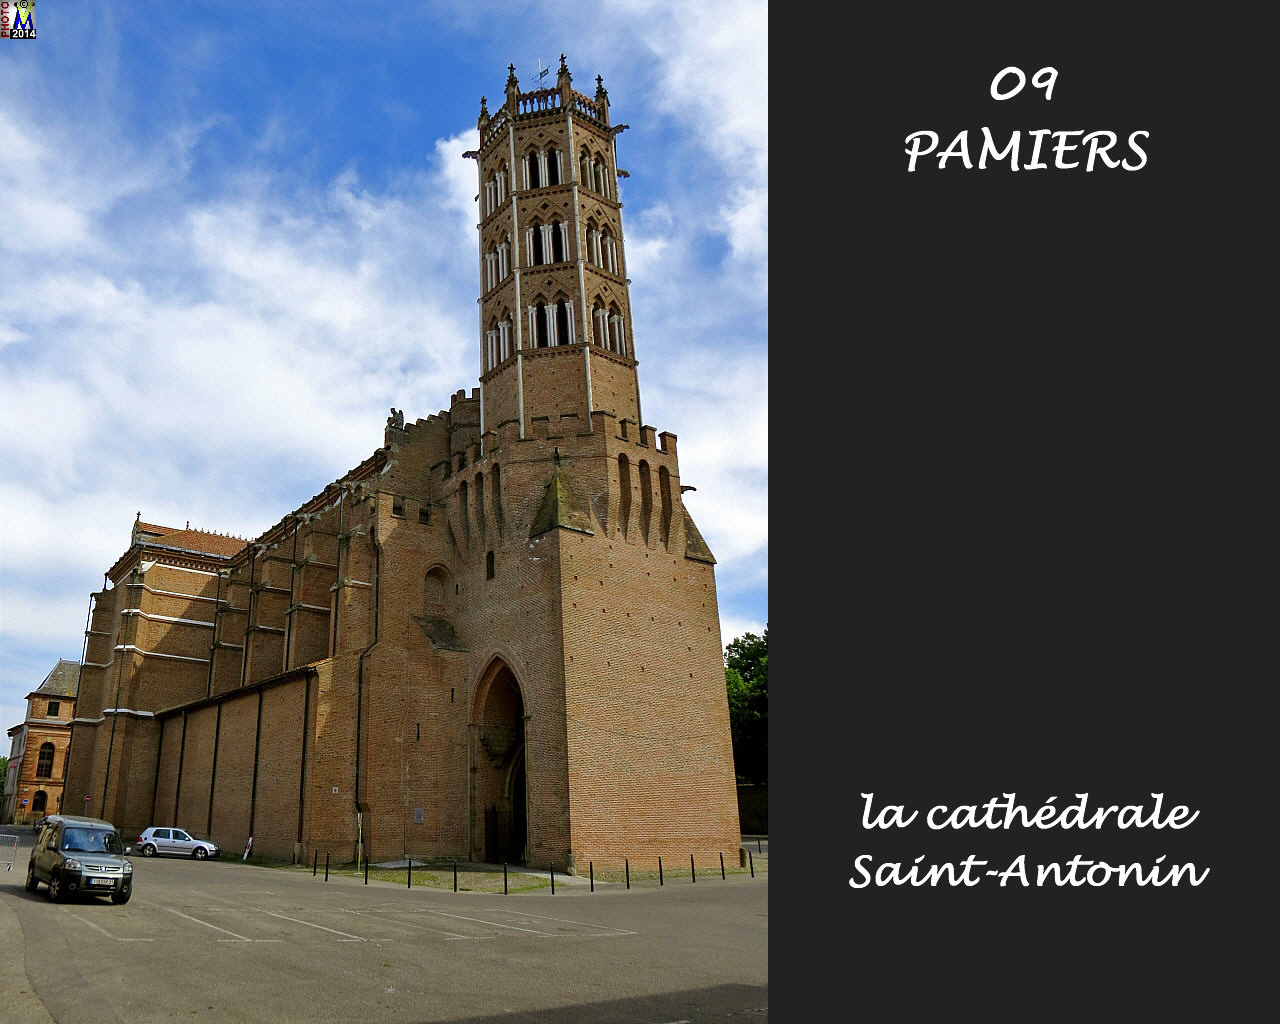 09PAMIERS_cathedrale_100.jpg